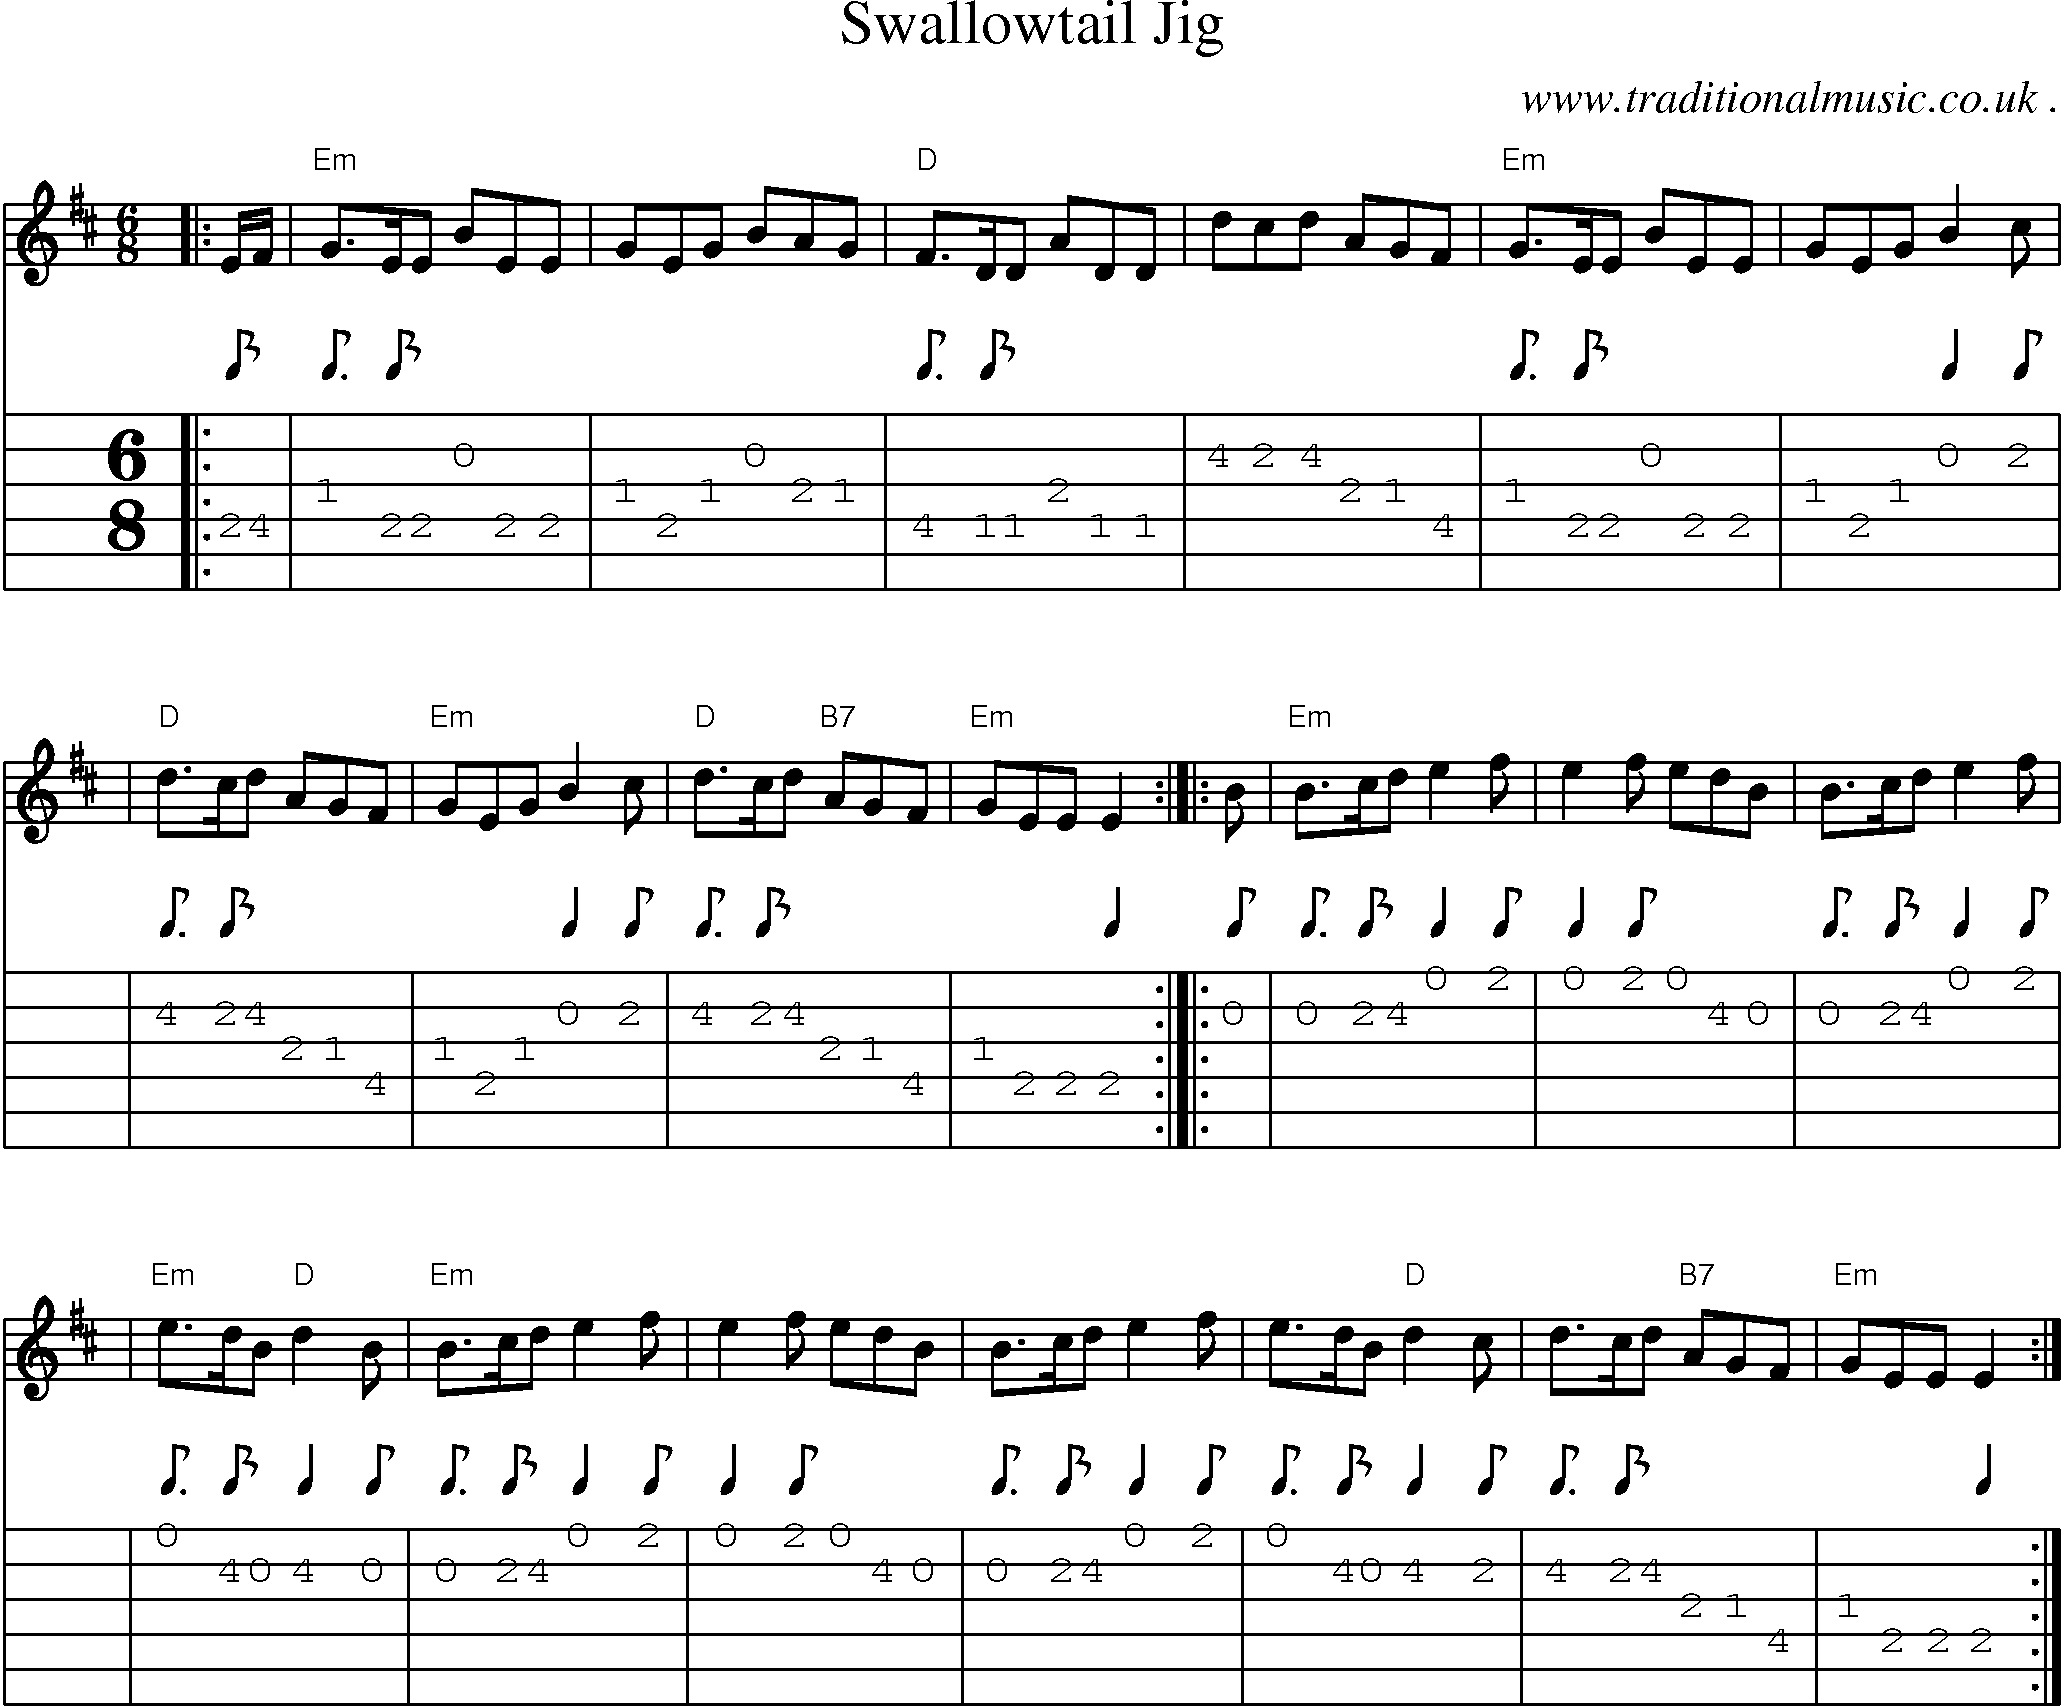 Sheet-music  score, Chords and Guitar Tabs for Swallowtail Jig